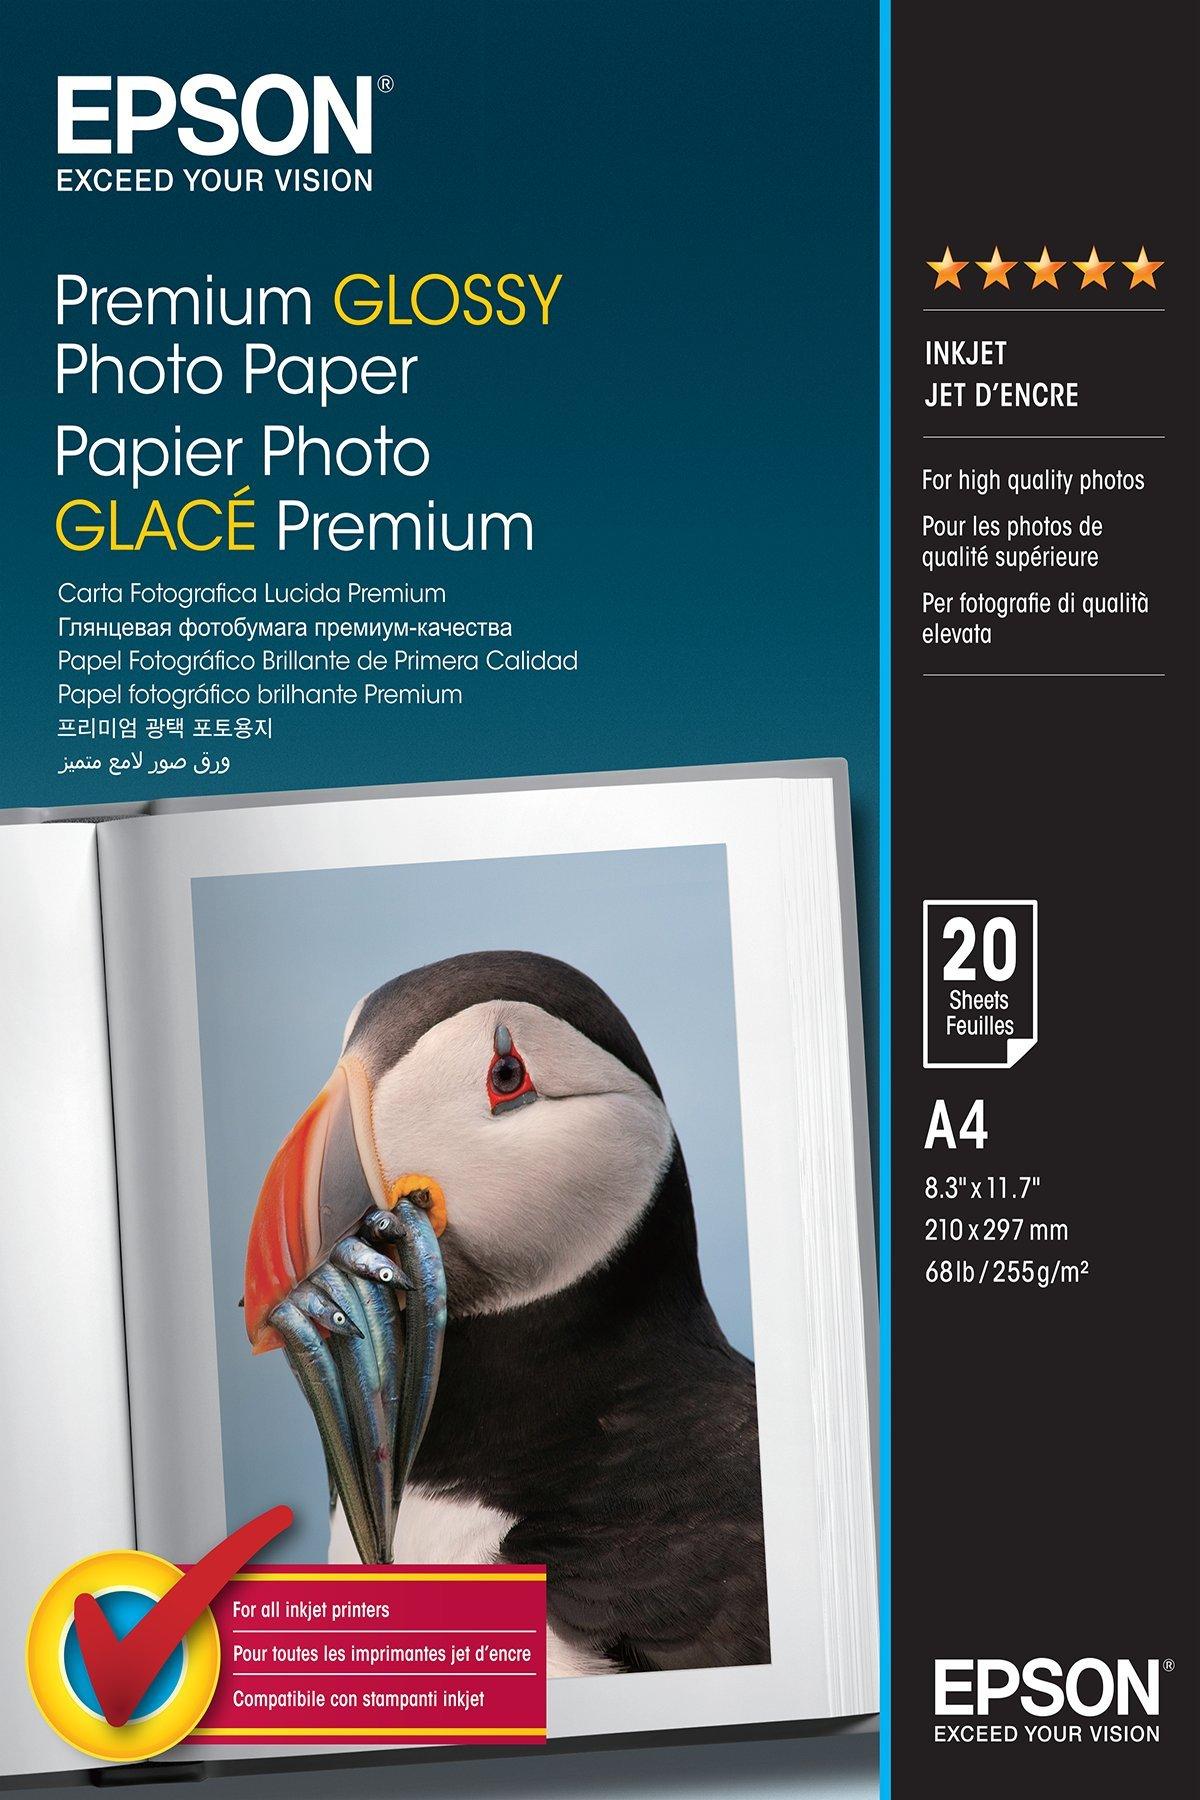 Premium Glossy Photo Paper - A4 - 20 Sheets, Paper and Media, Ink & Paper, Products